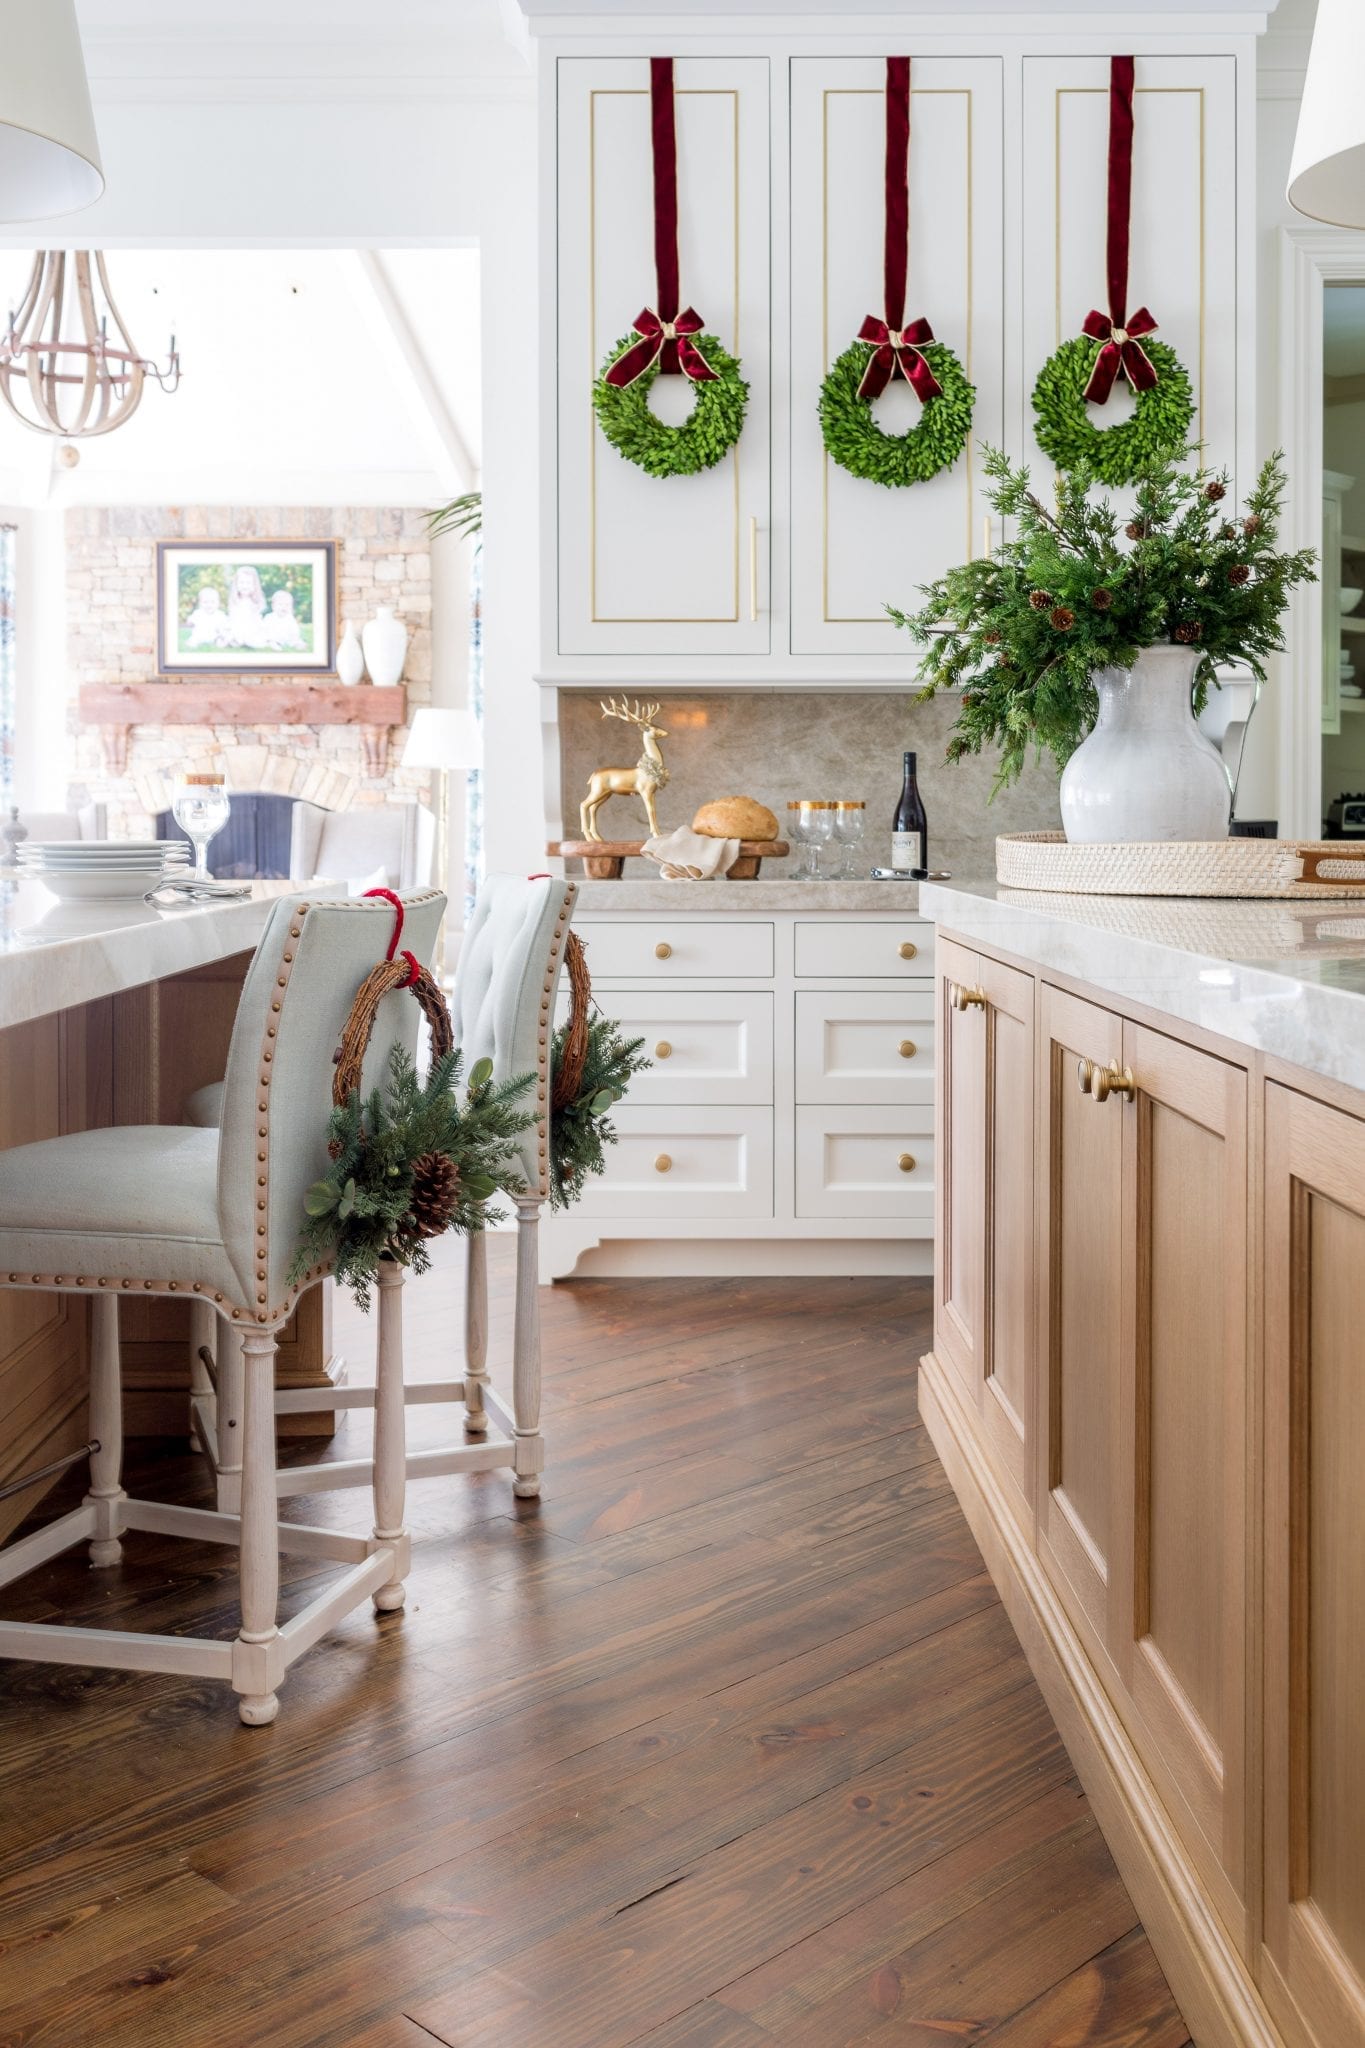 How to Hang Wreath on Kitchen Cabinets